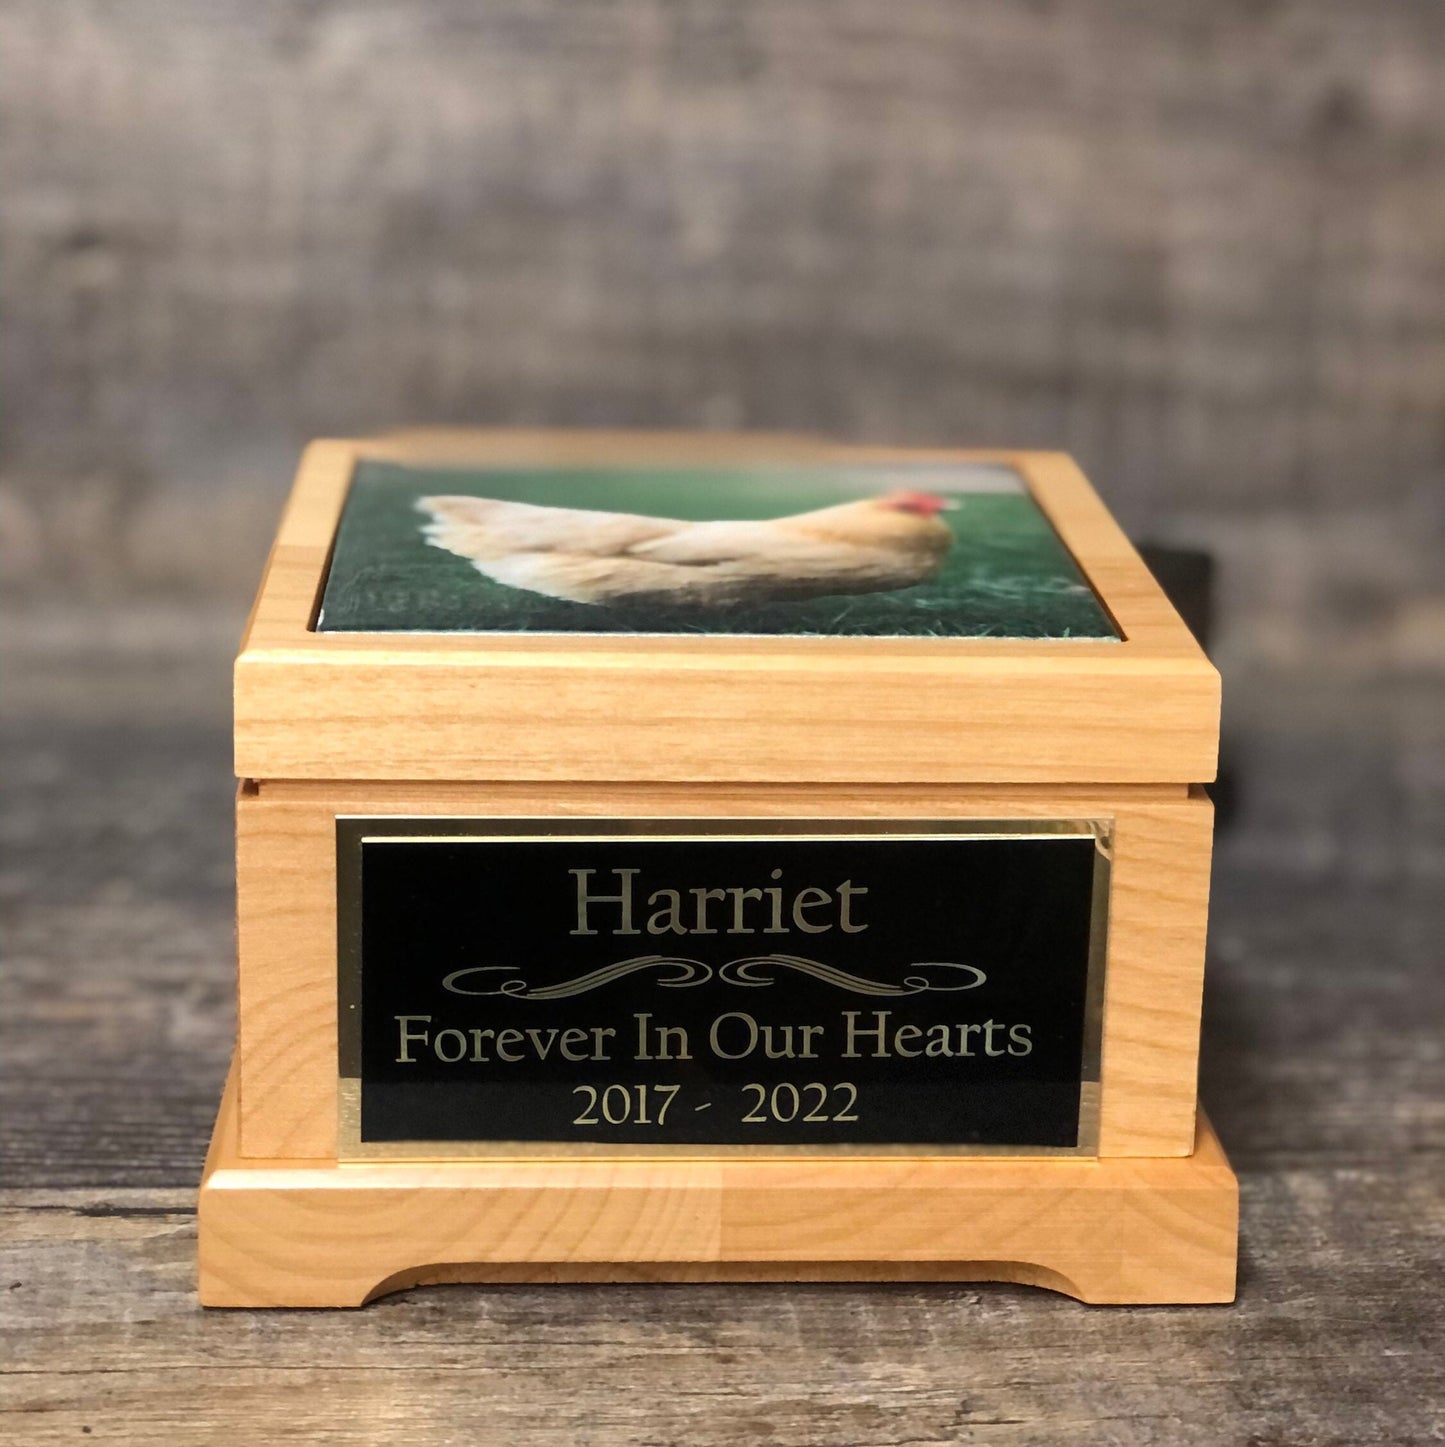 Hen Urn Small Animal Pet Urn Chicken Rooster Duck Urn Pet Memorial Keepsake Box Cremation Urn Custom Photo Tile & Engraved Tag To 25lbs